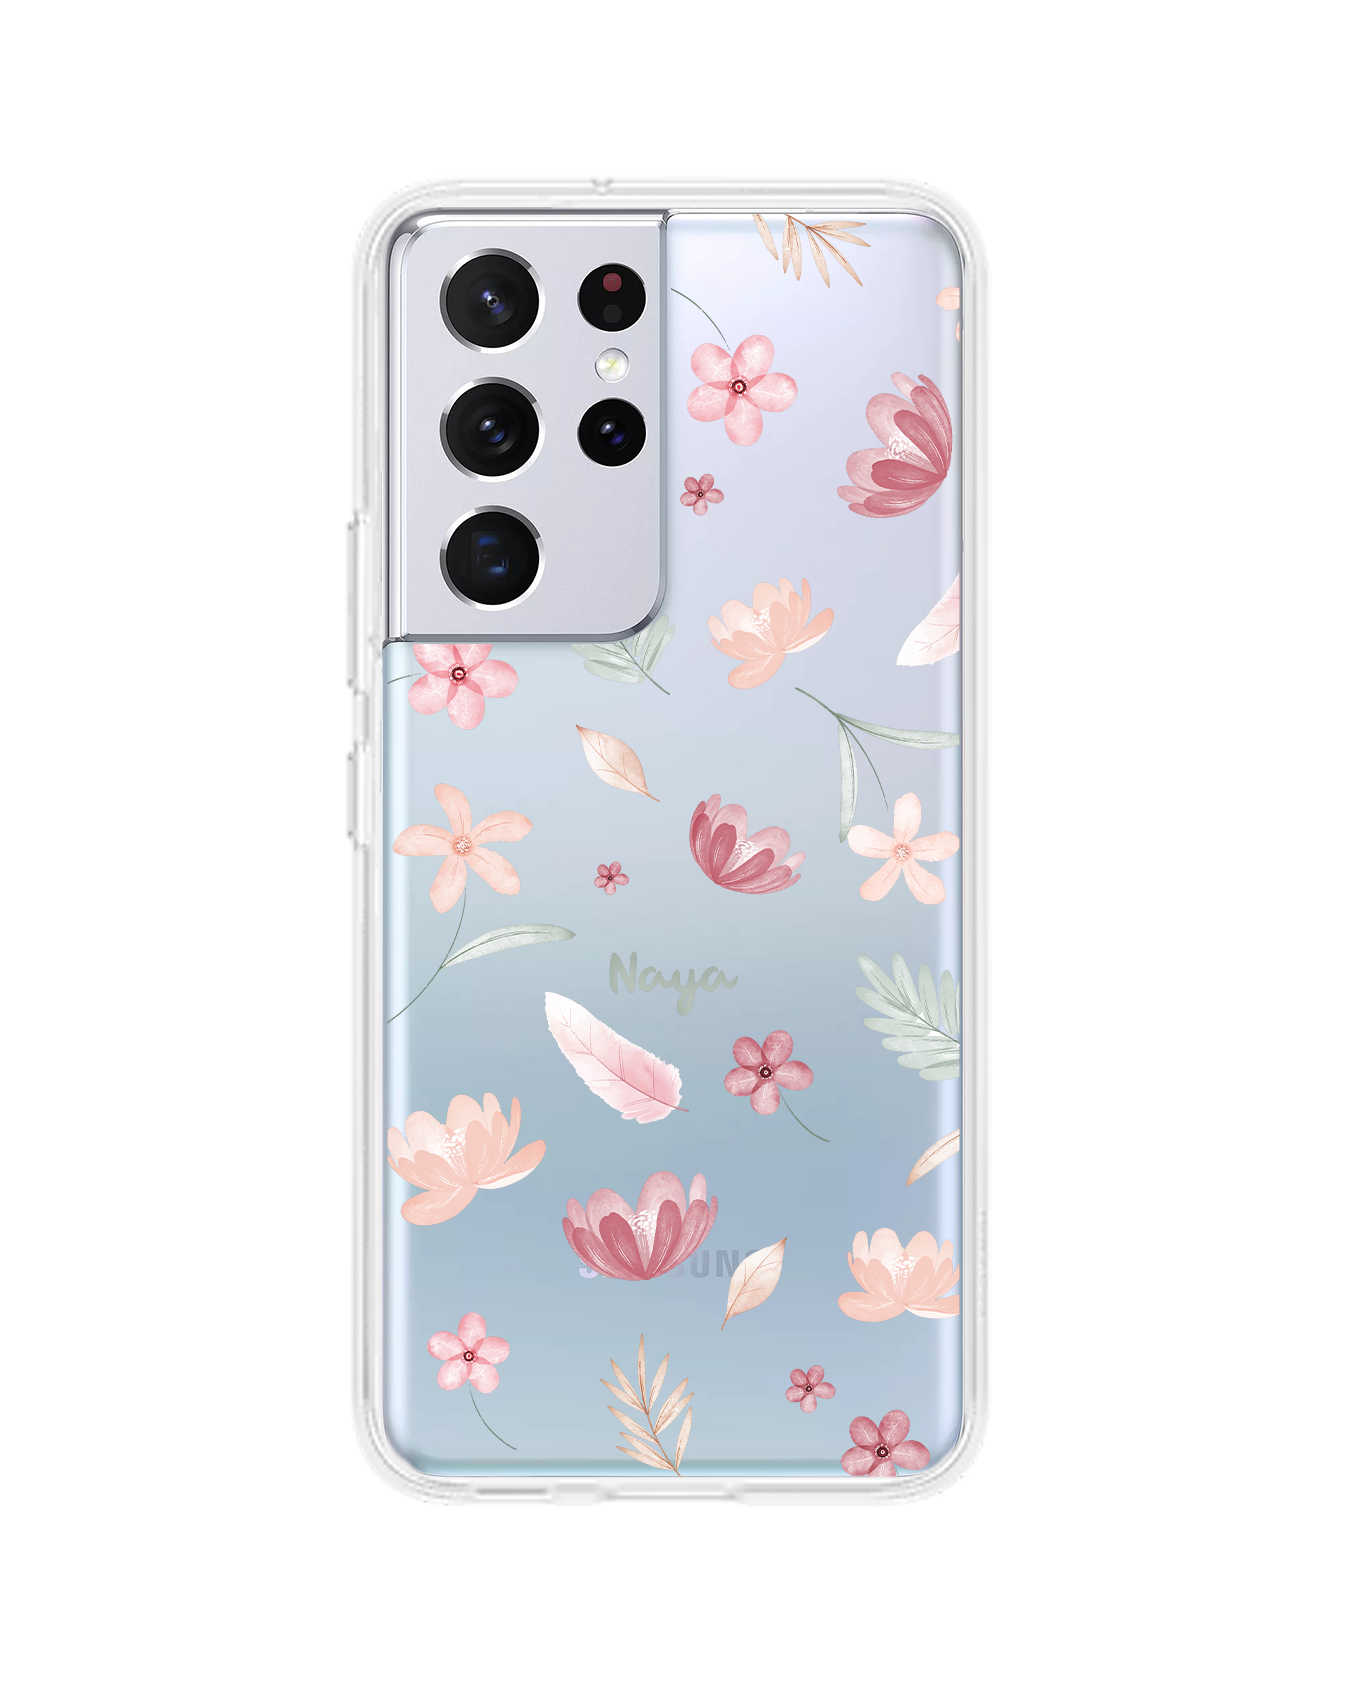 Android Rearguard Hybrid Case - Wild Flower